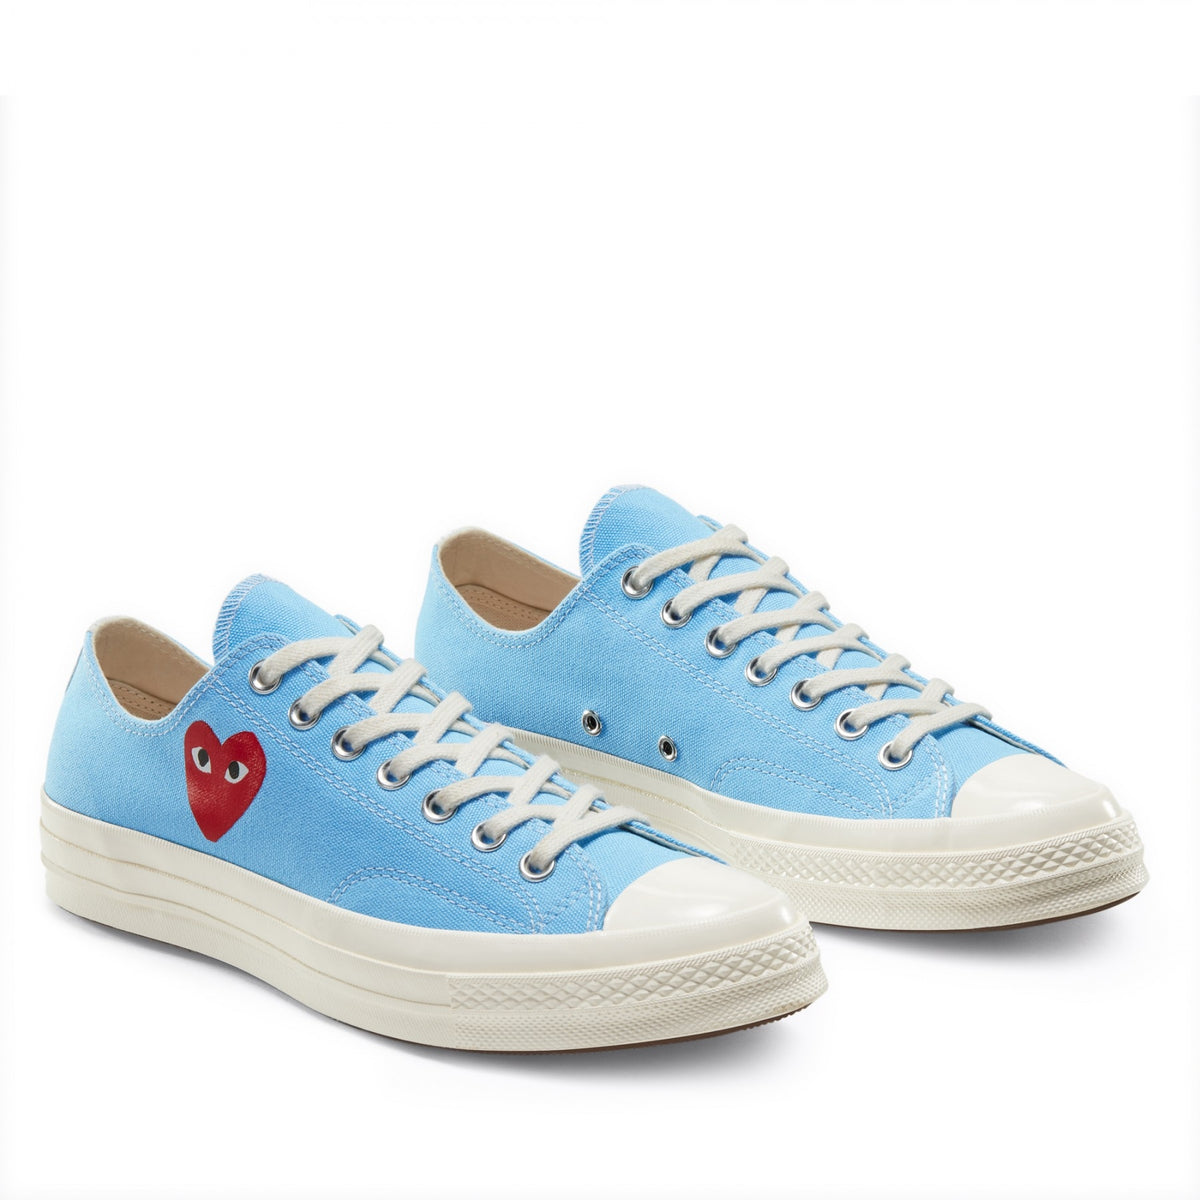 converse all star low tops neon blue